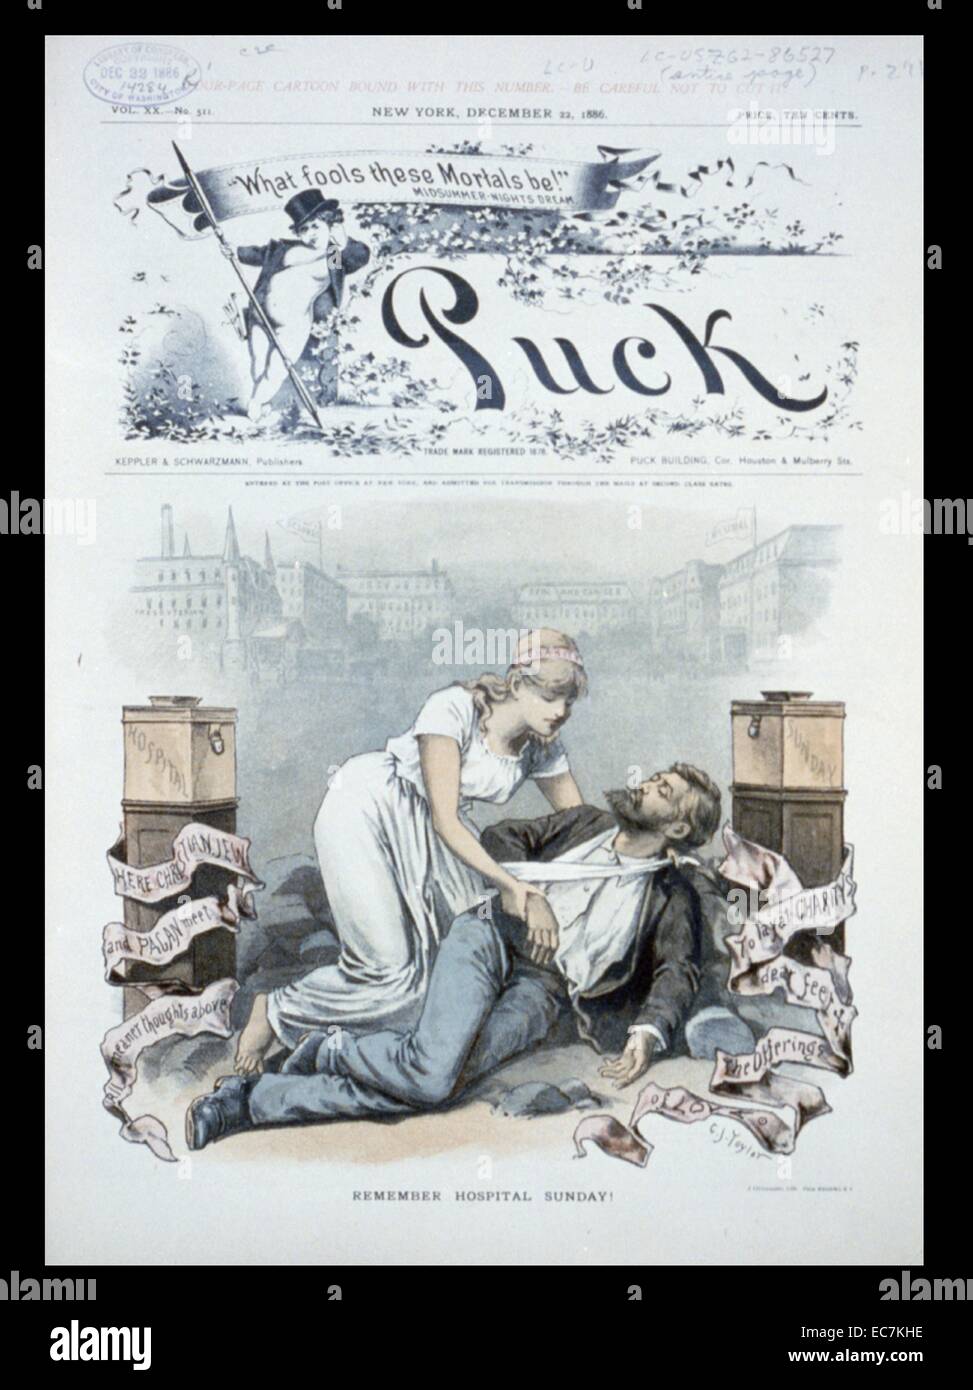 Remember Hospital Sunday! A woman representing Charity helping a man lying on the ground with his arm in a sling. In the background are the St. Luke's and Mt. Sinai Hospital. Stock Photo